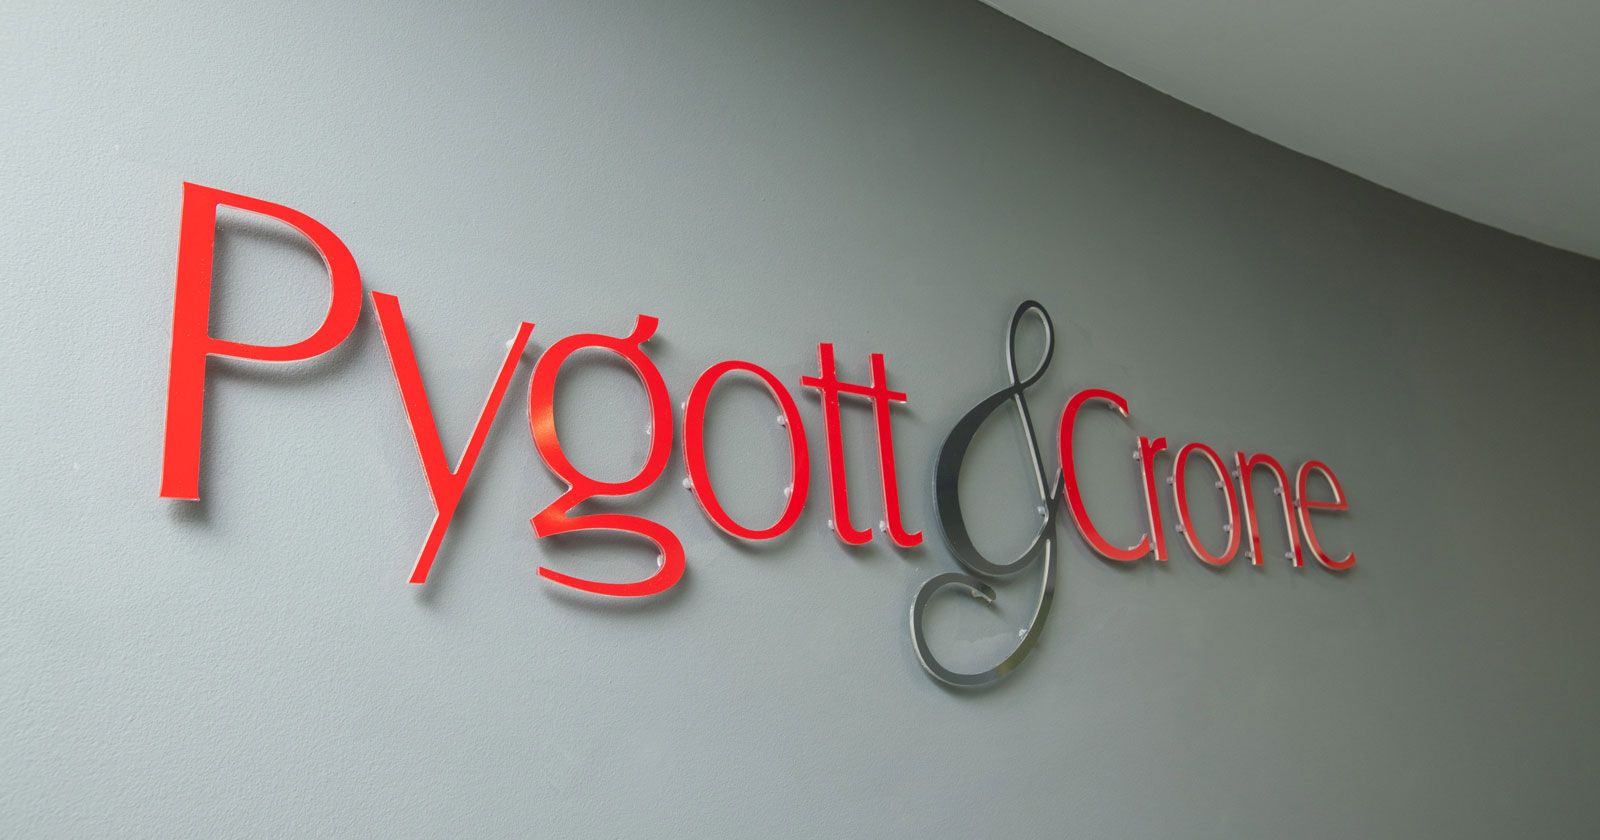 Pygott-and-Crone-wall-signage-by-APSS